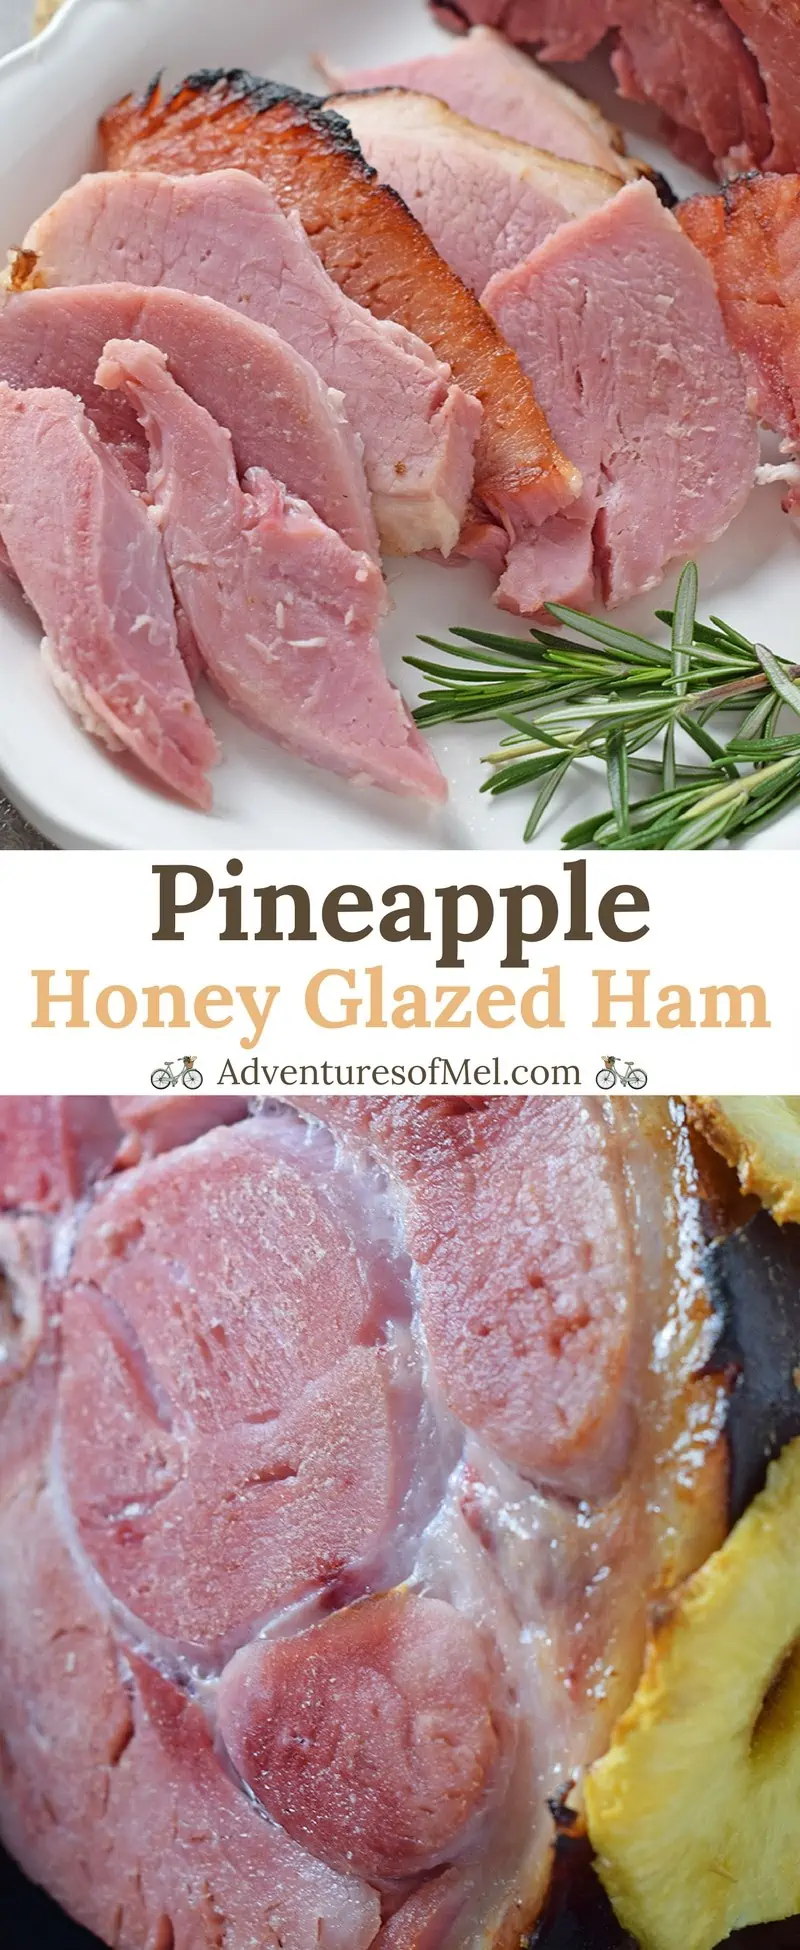 Pineapple Honey Glazed Ham recipe. How to make a perfectly cooked, moist, delicious ham for dinner and holiday celebrations.